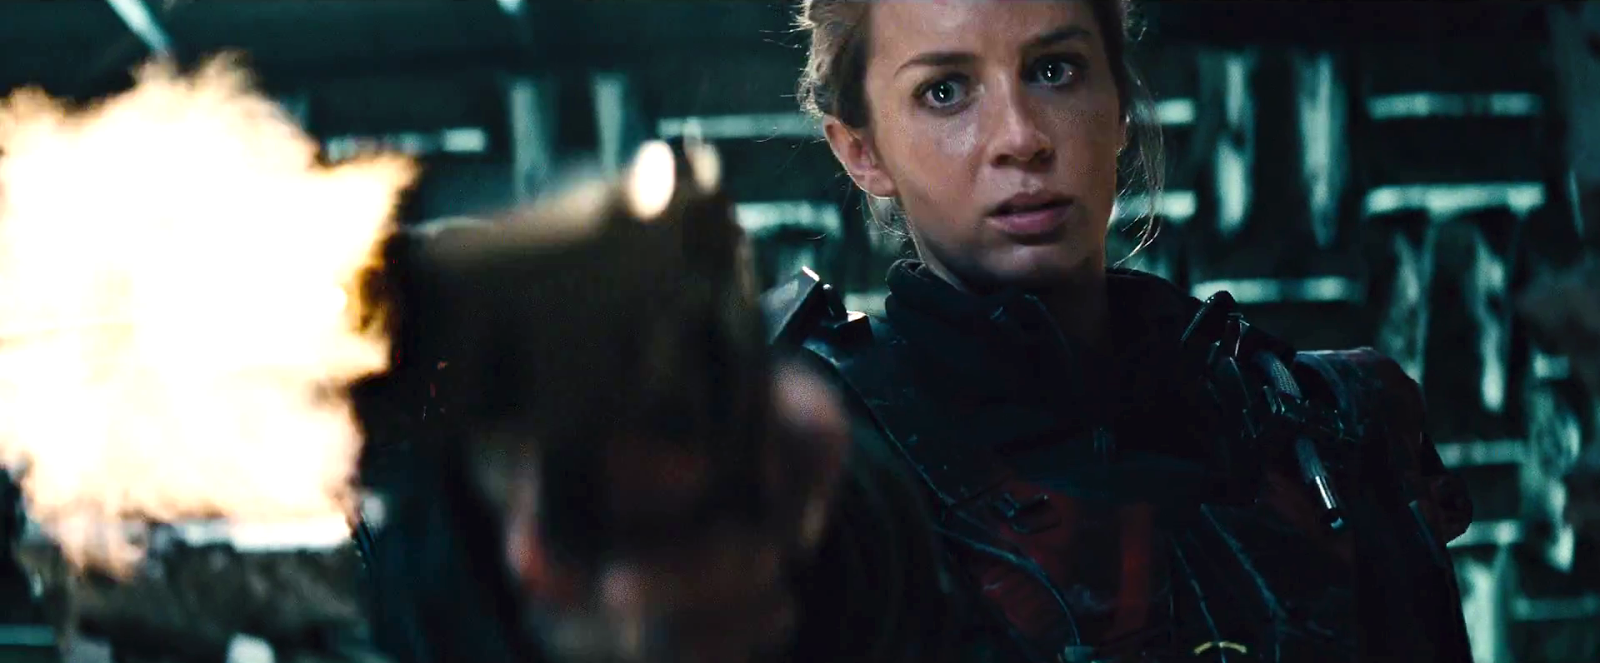 edge of tomorrow emily blunt shooting a gun at tom crusie off screen all you need is kill movie.png